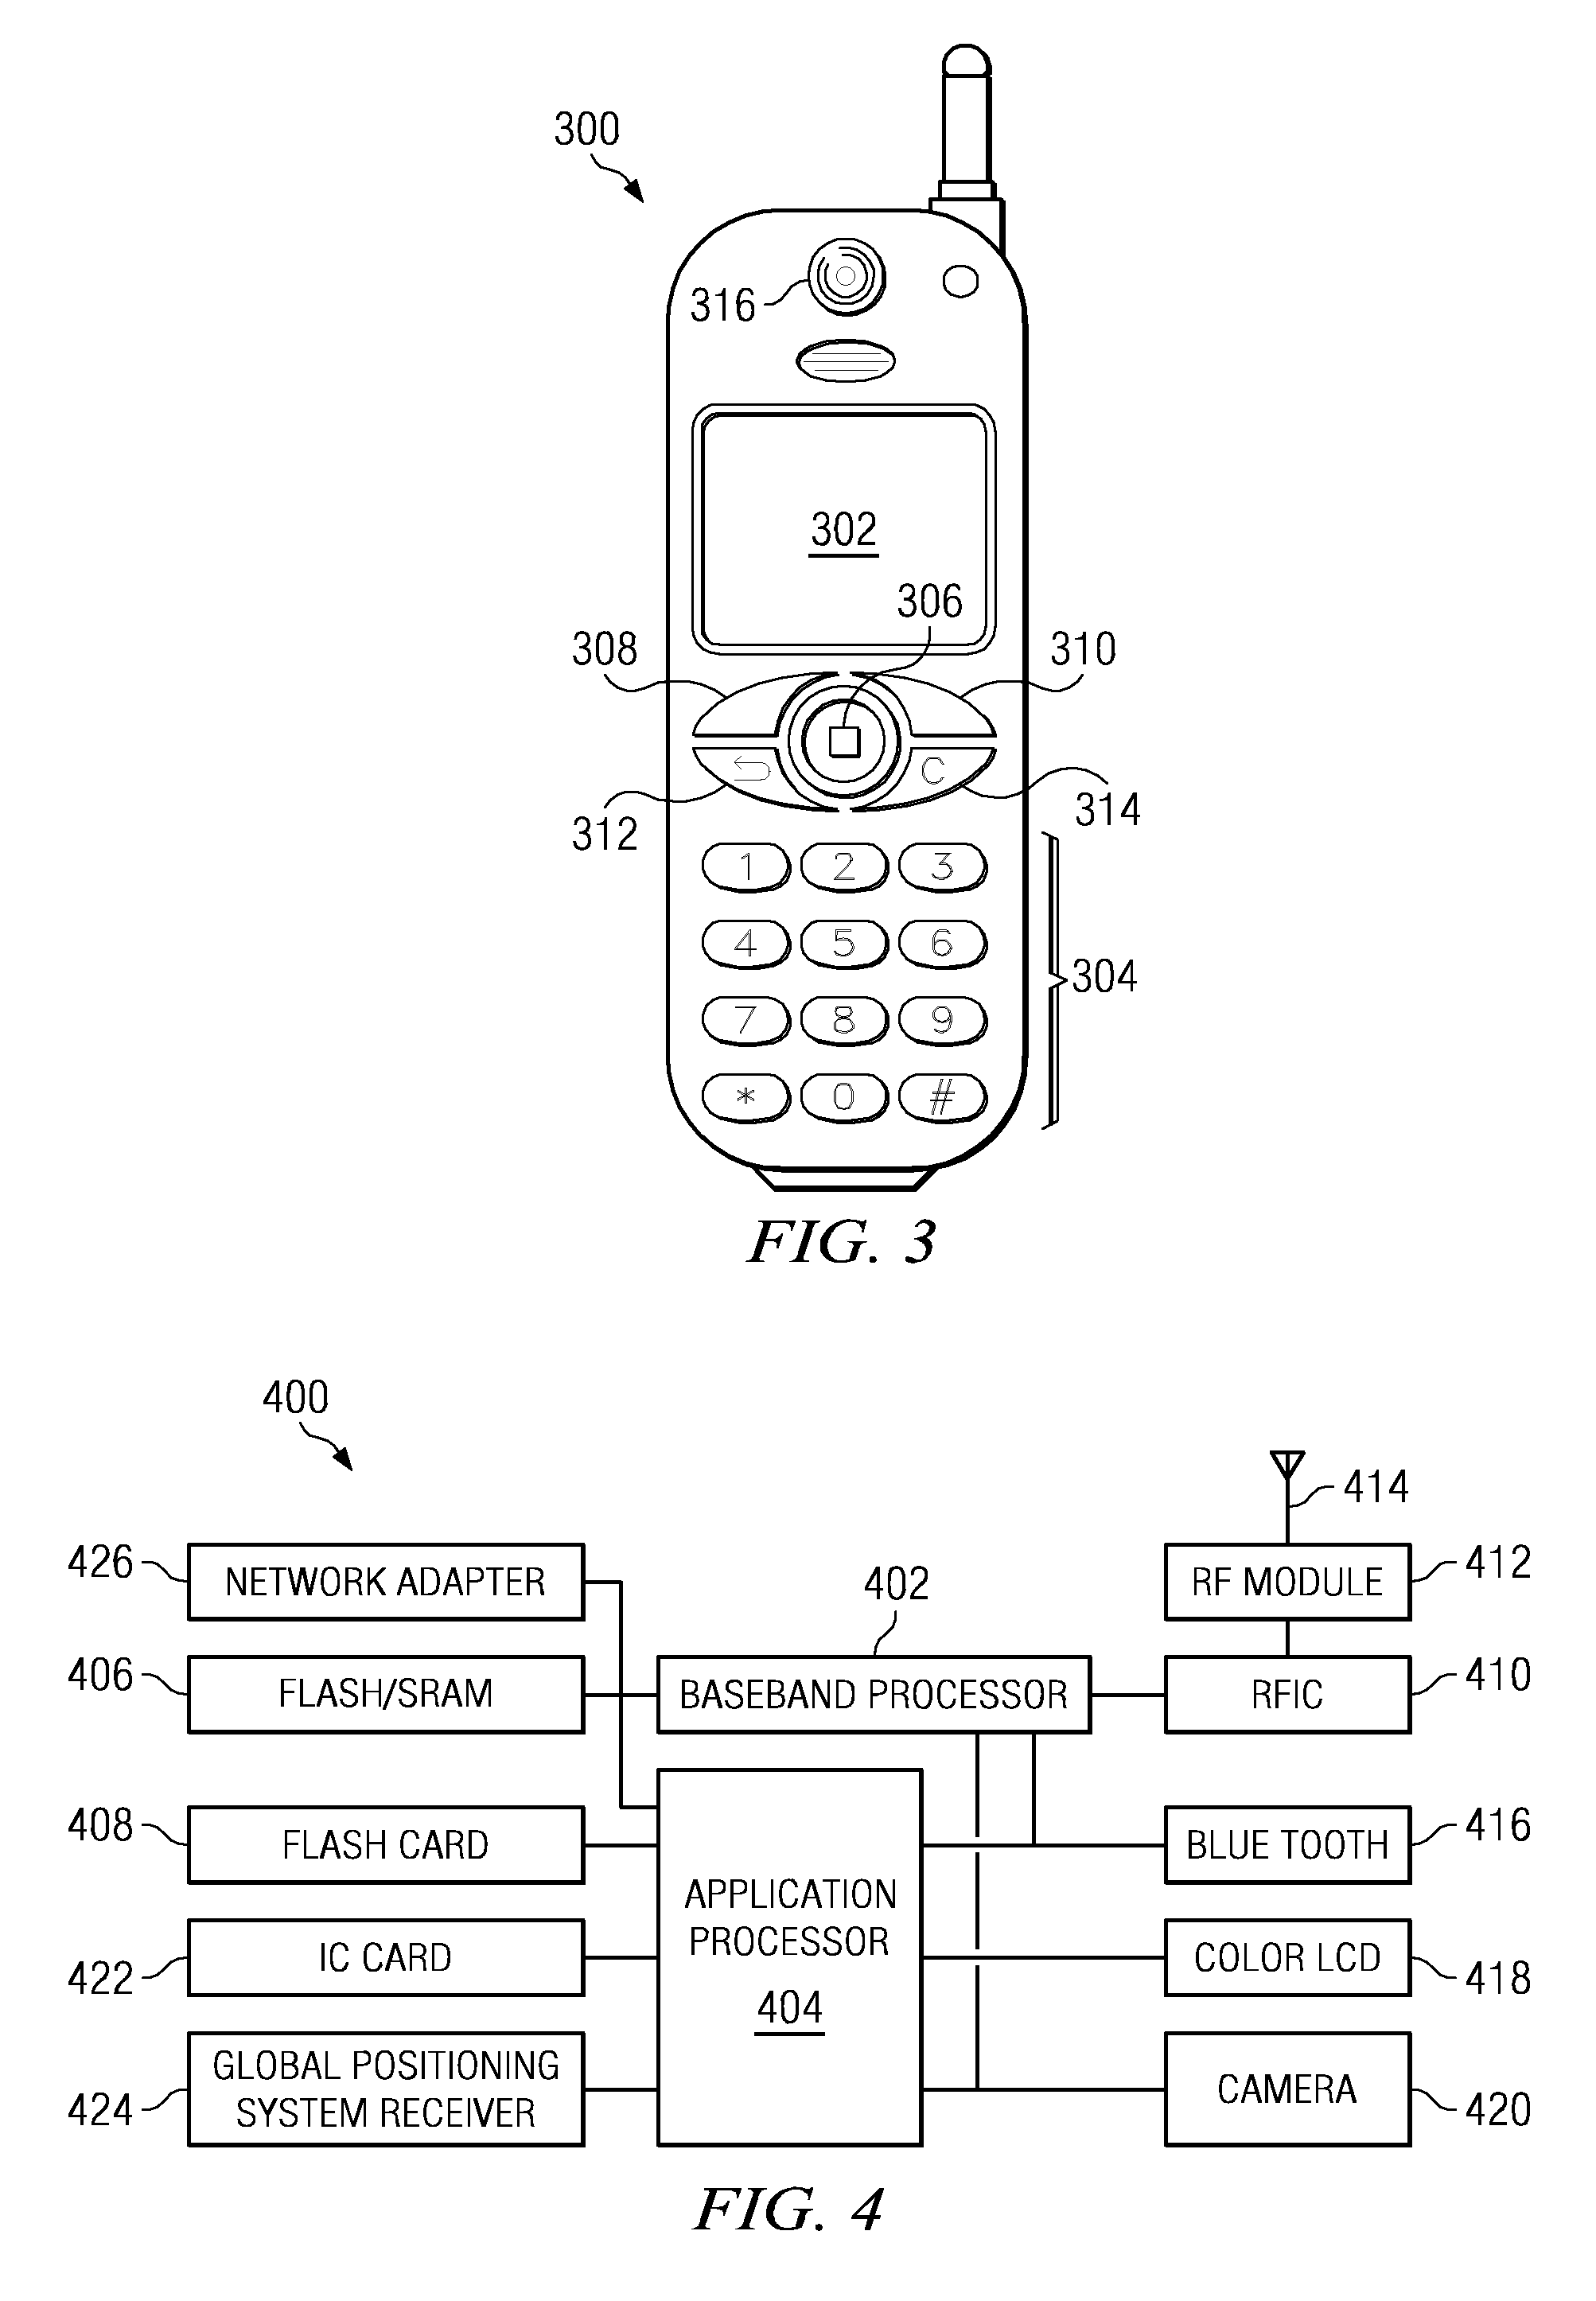 Dynamic update of contact information and speed dial settings based on a virtual world interaction